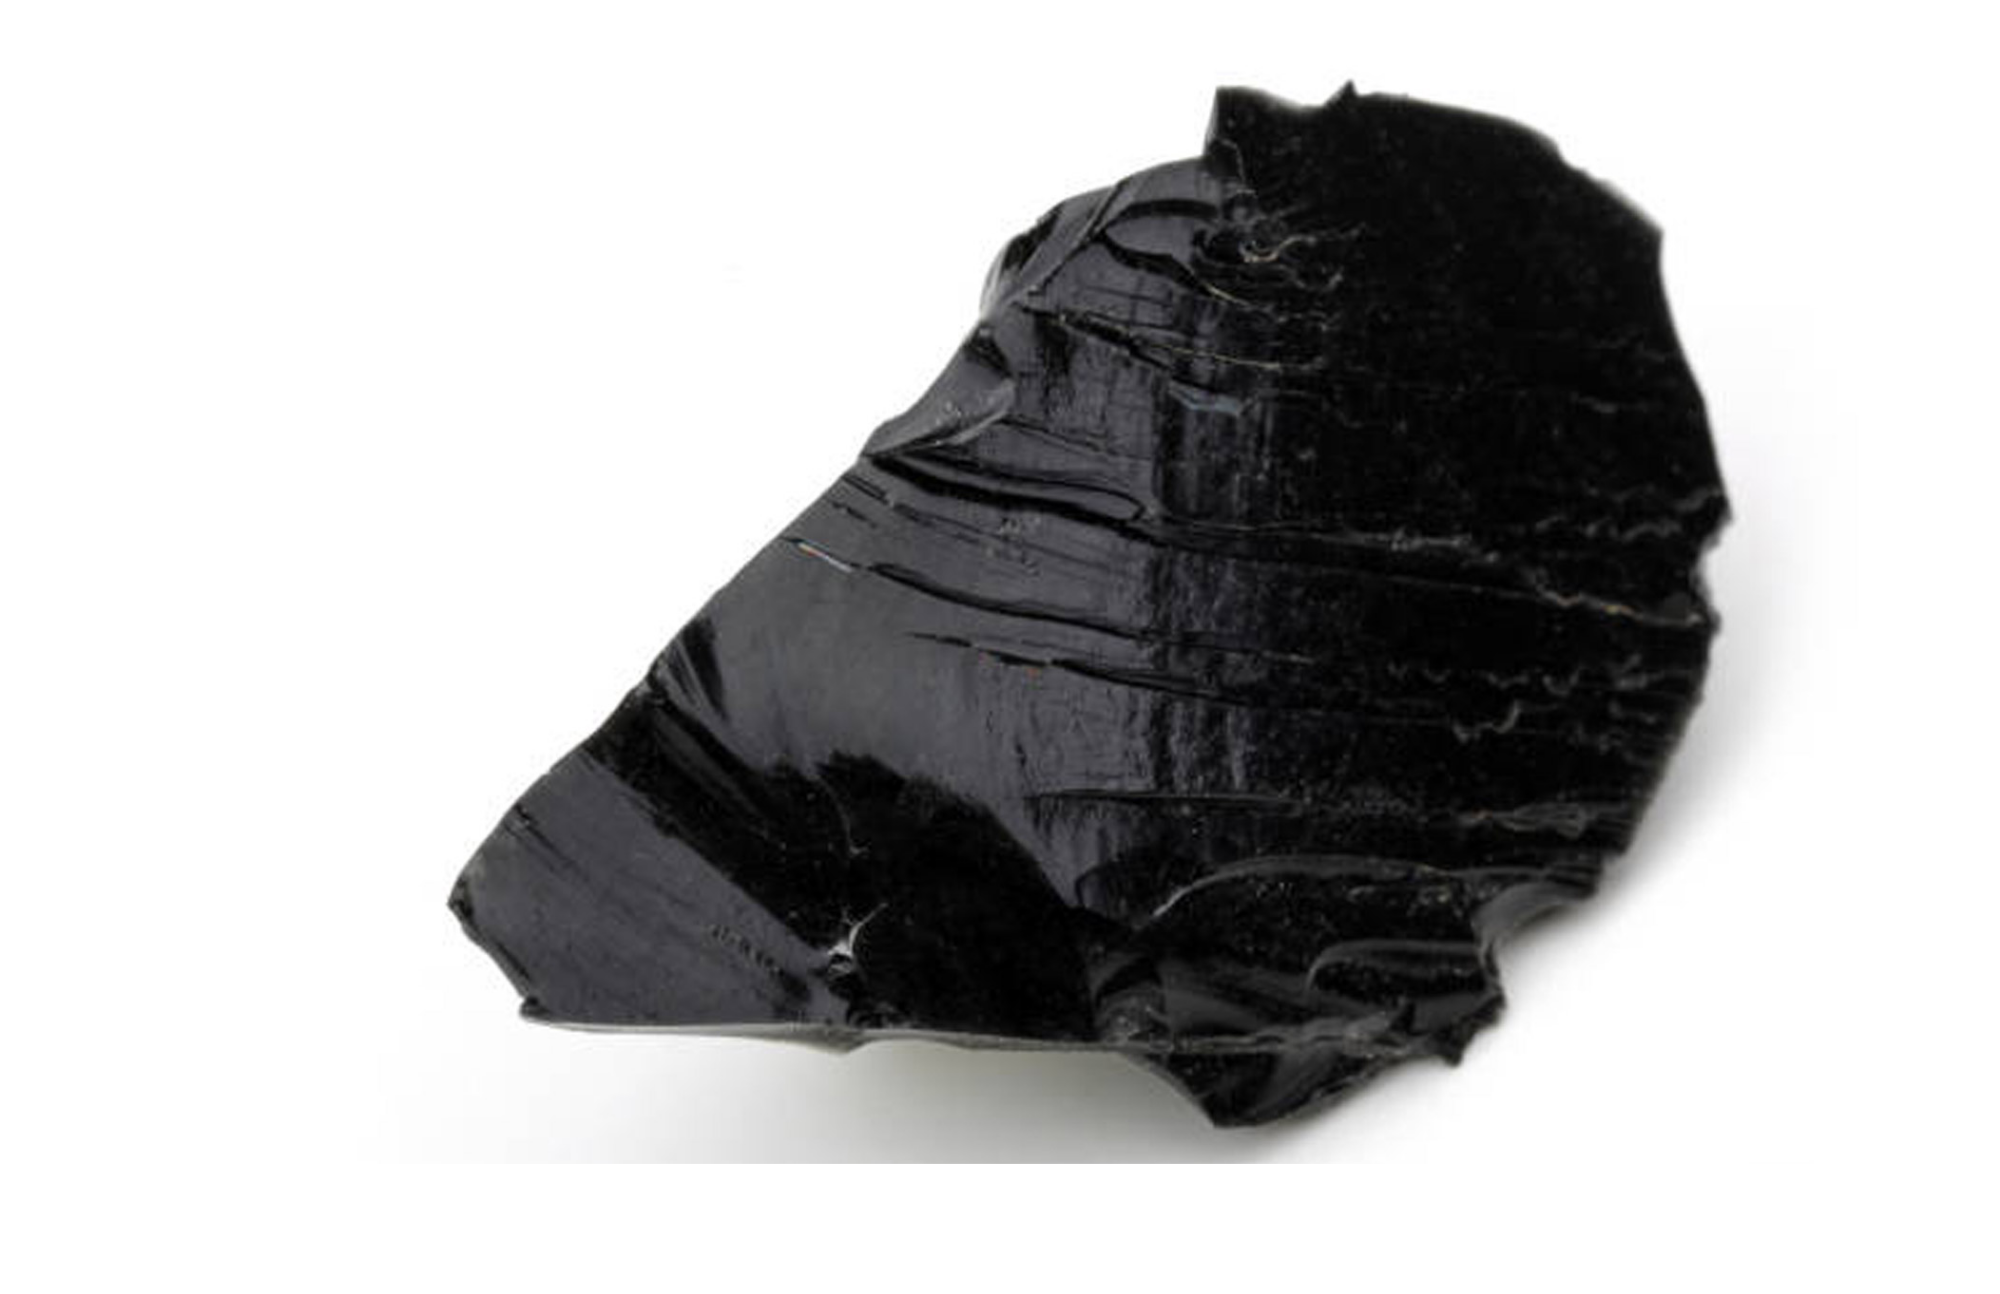 Onyx in the form of a rock